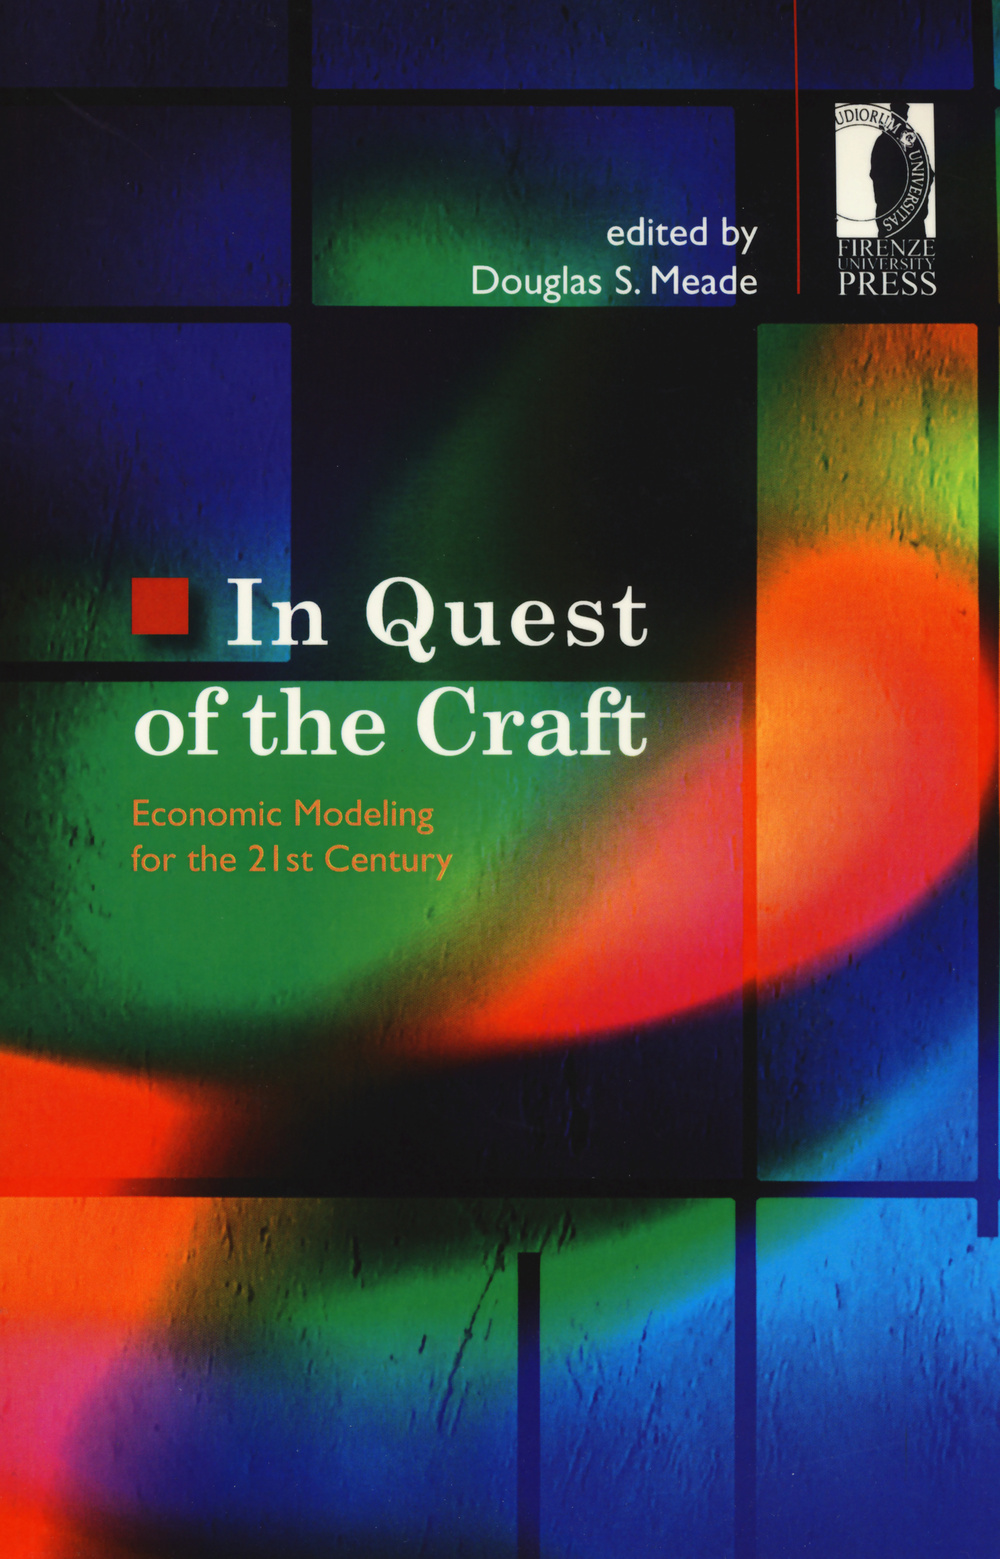 In quest of the craft. Economic modelling for the 21st century